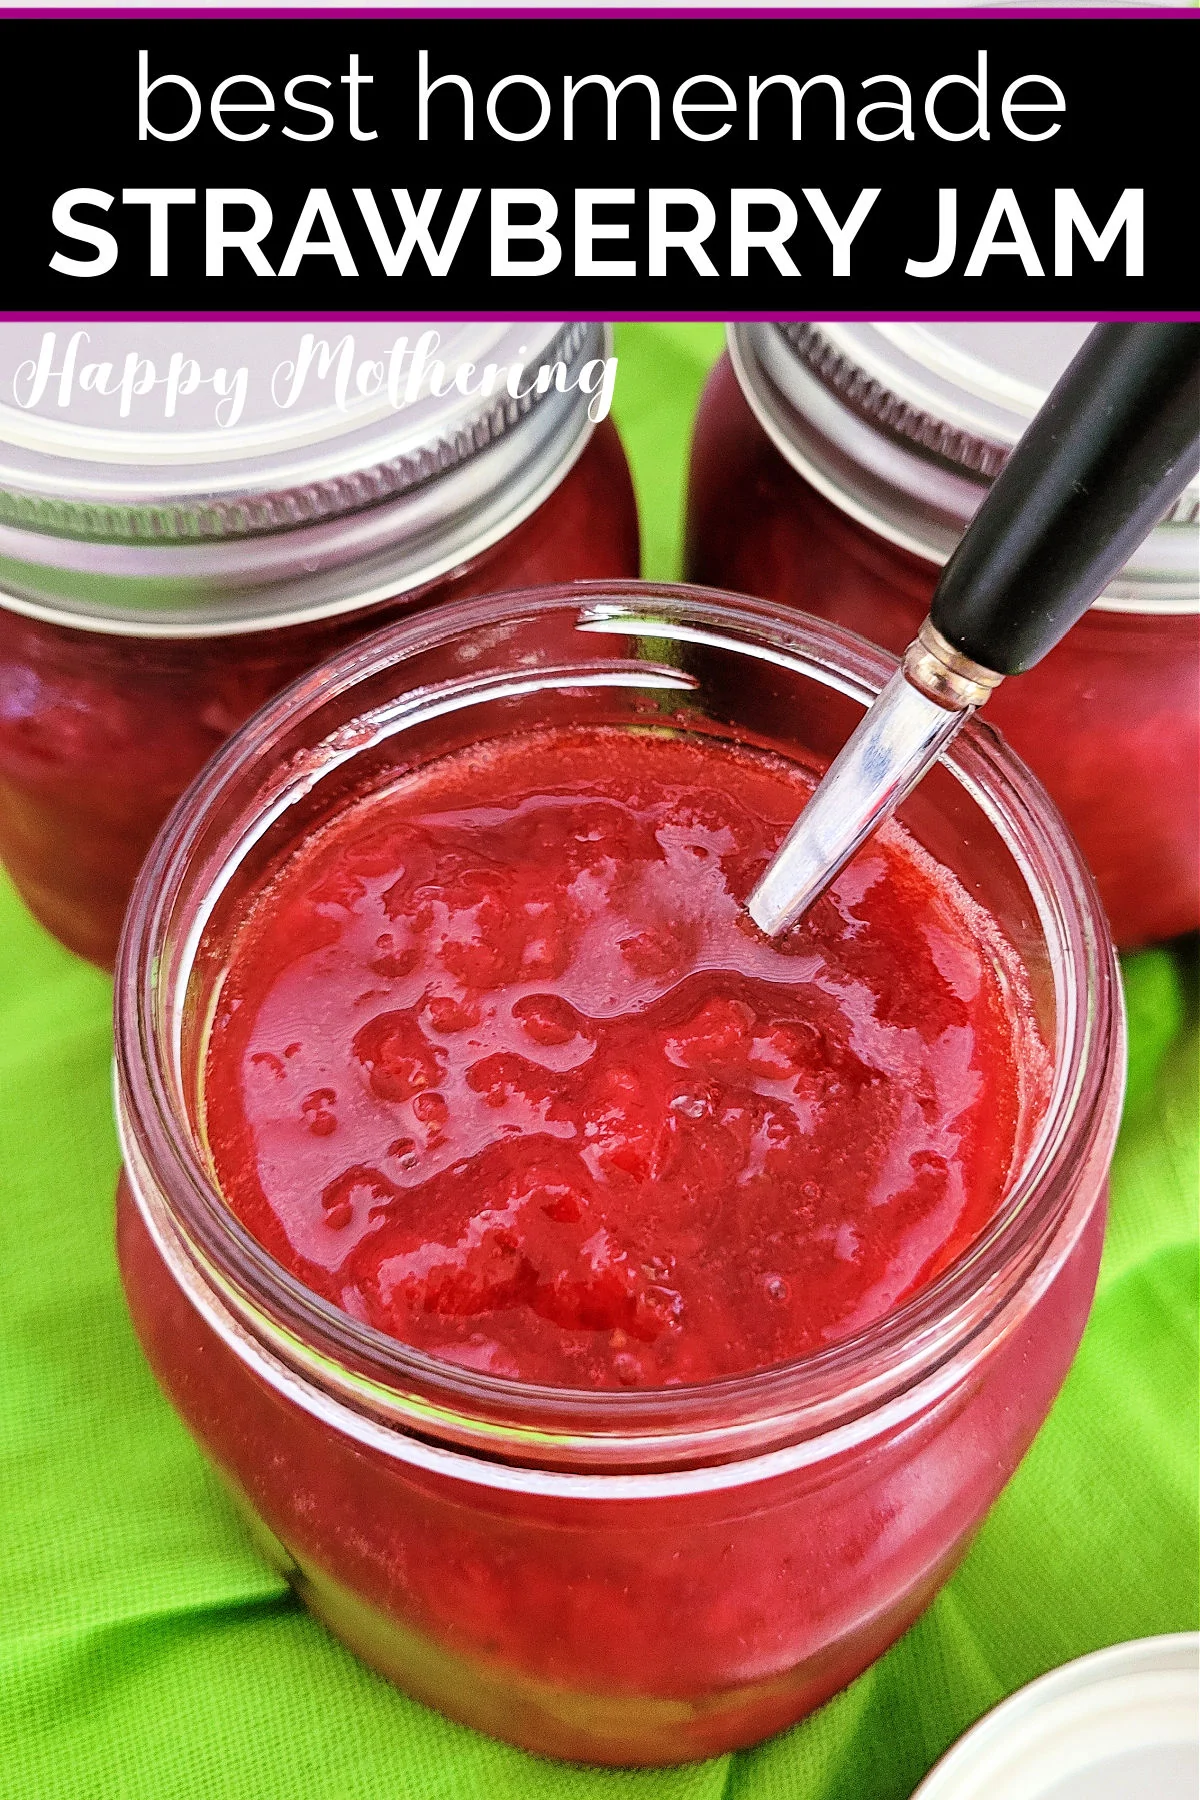 Are you looking for tips and tricks for making the best homemade strawberry jam? Learn how to make this easy small batch strawberry jam recipe without pectin and get my thoughts on uses and variations.